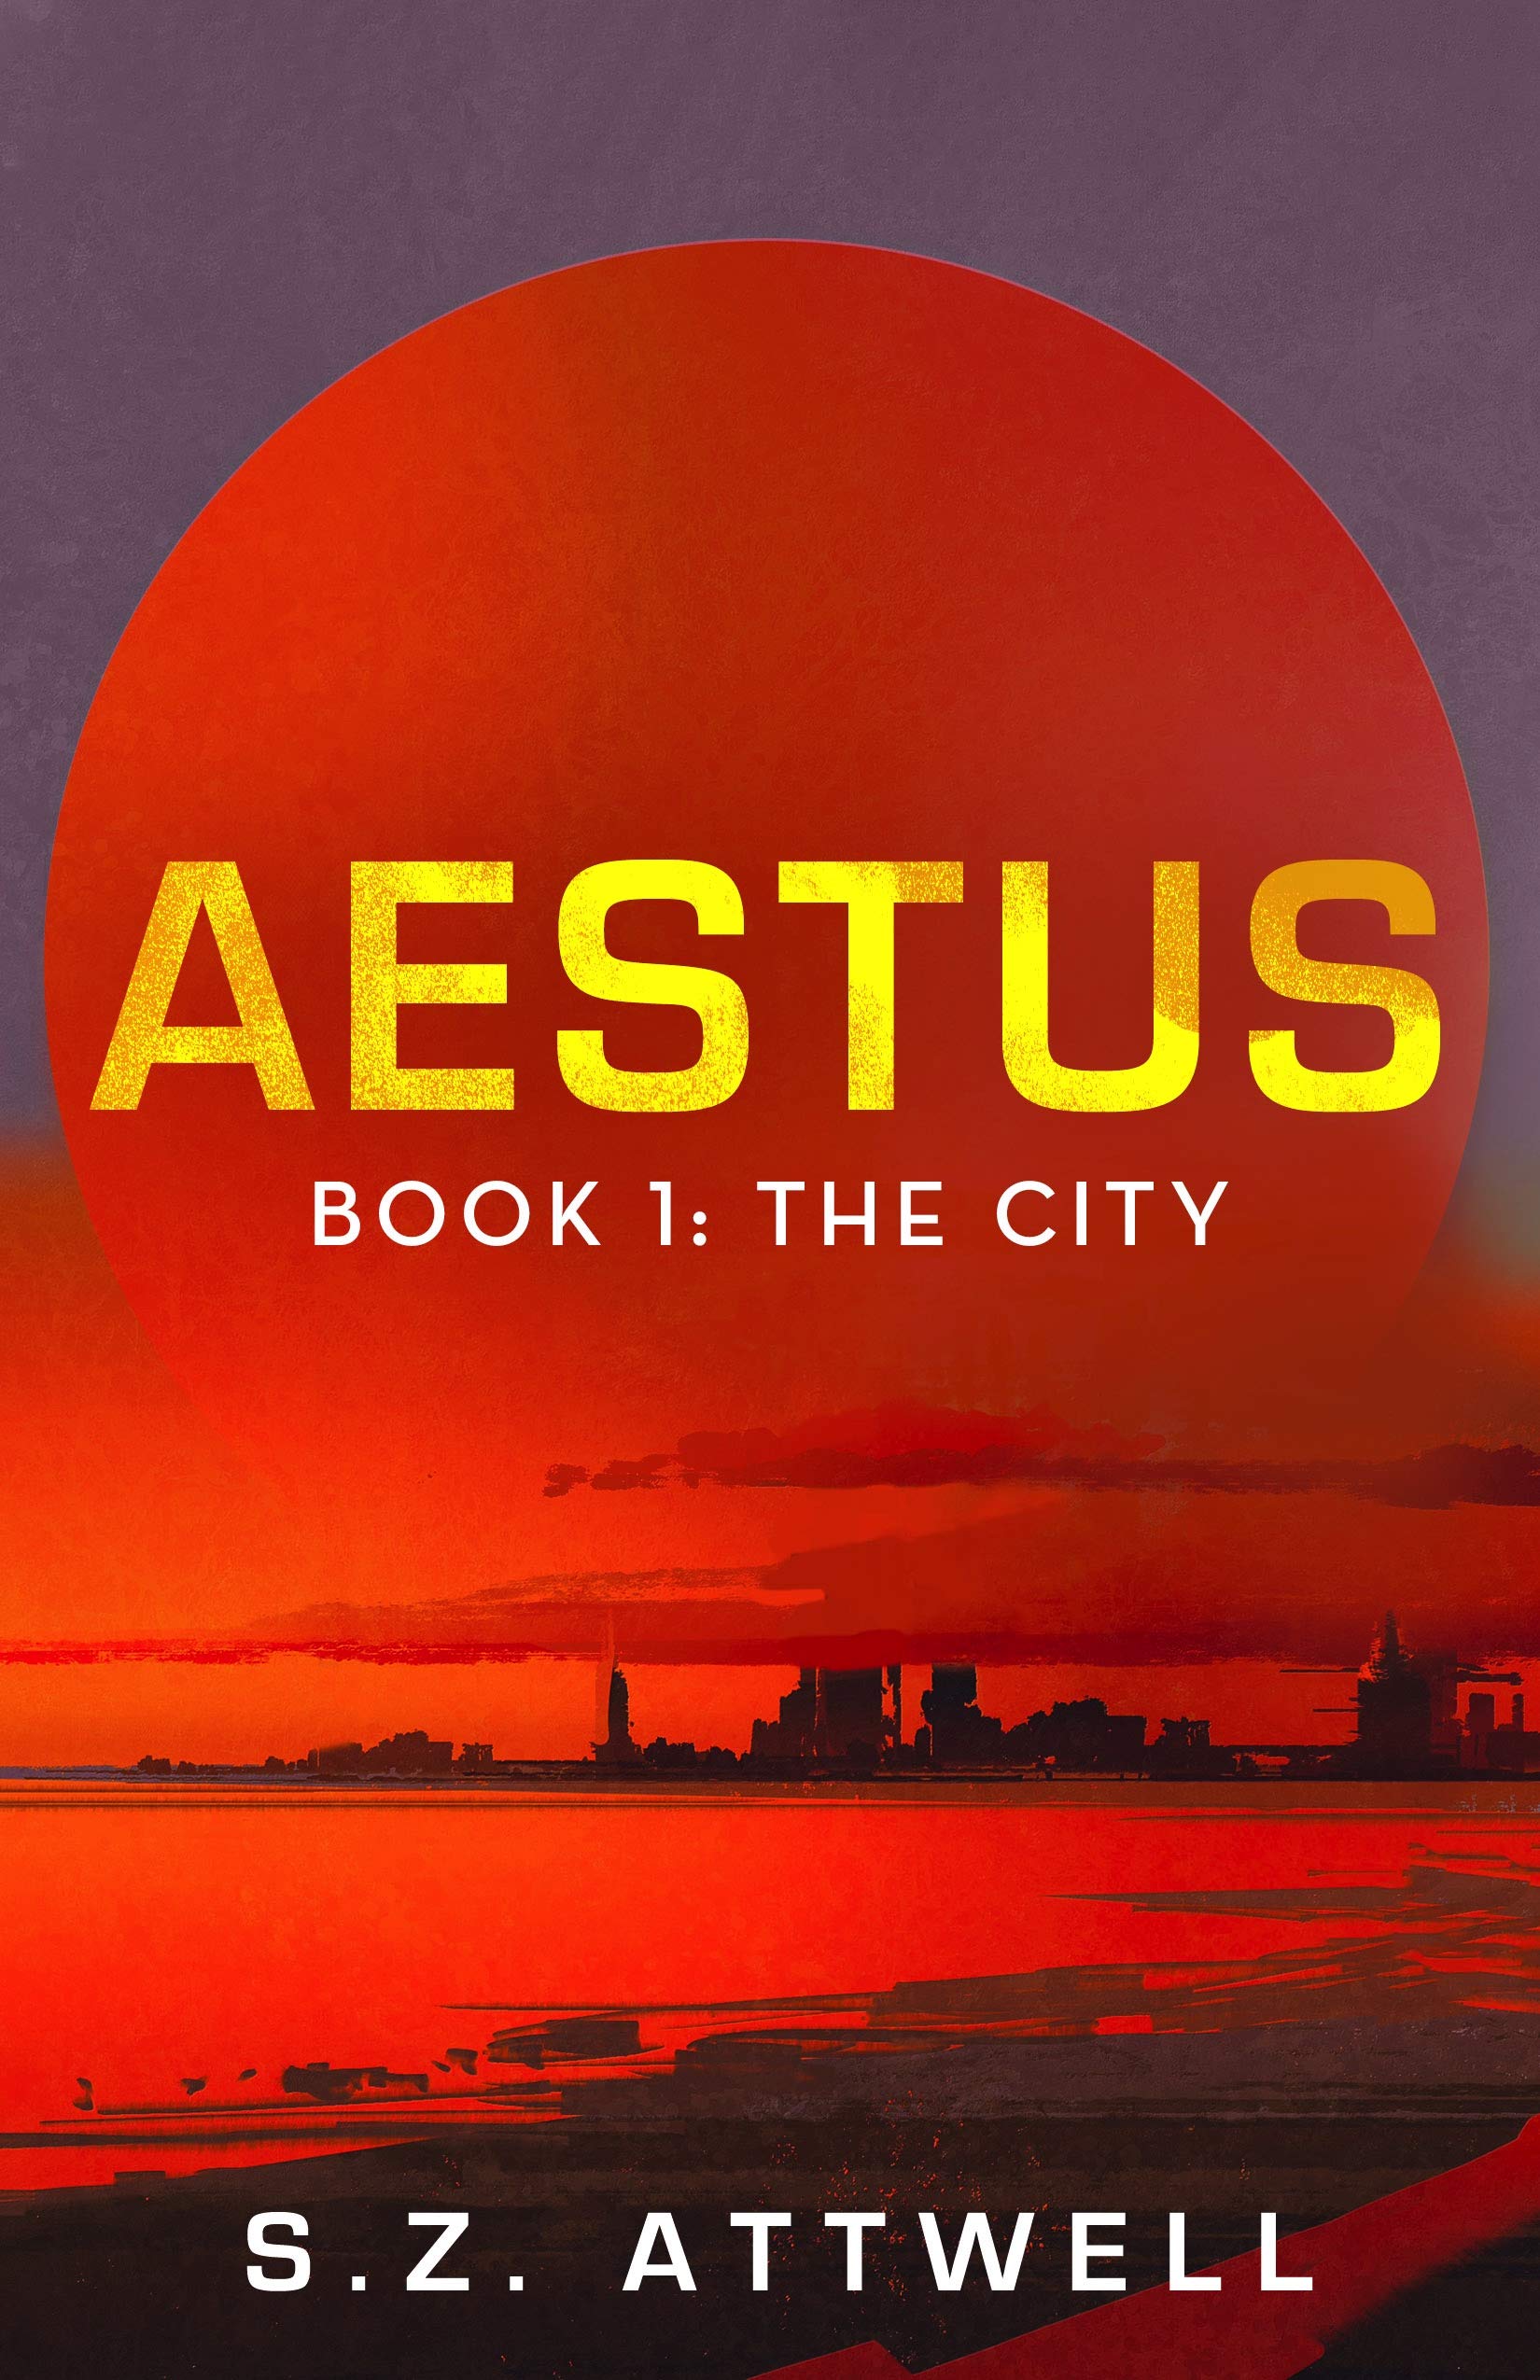 Aestus Book 1: The City by S.Z. Attwell cover: huge red sun painting the landscape red, silhouettes of distant buildings in the background.